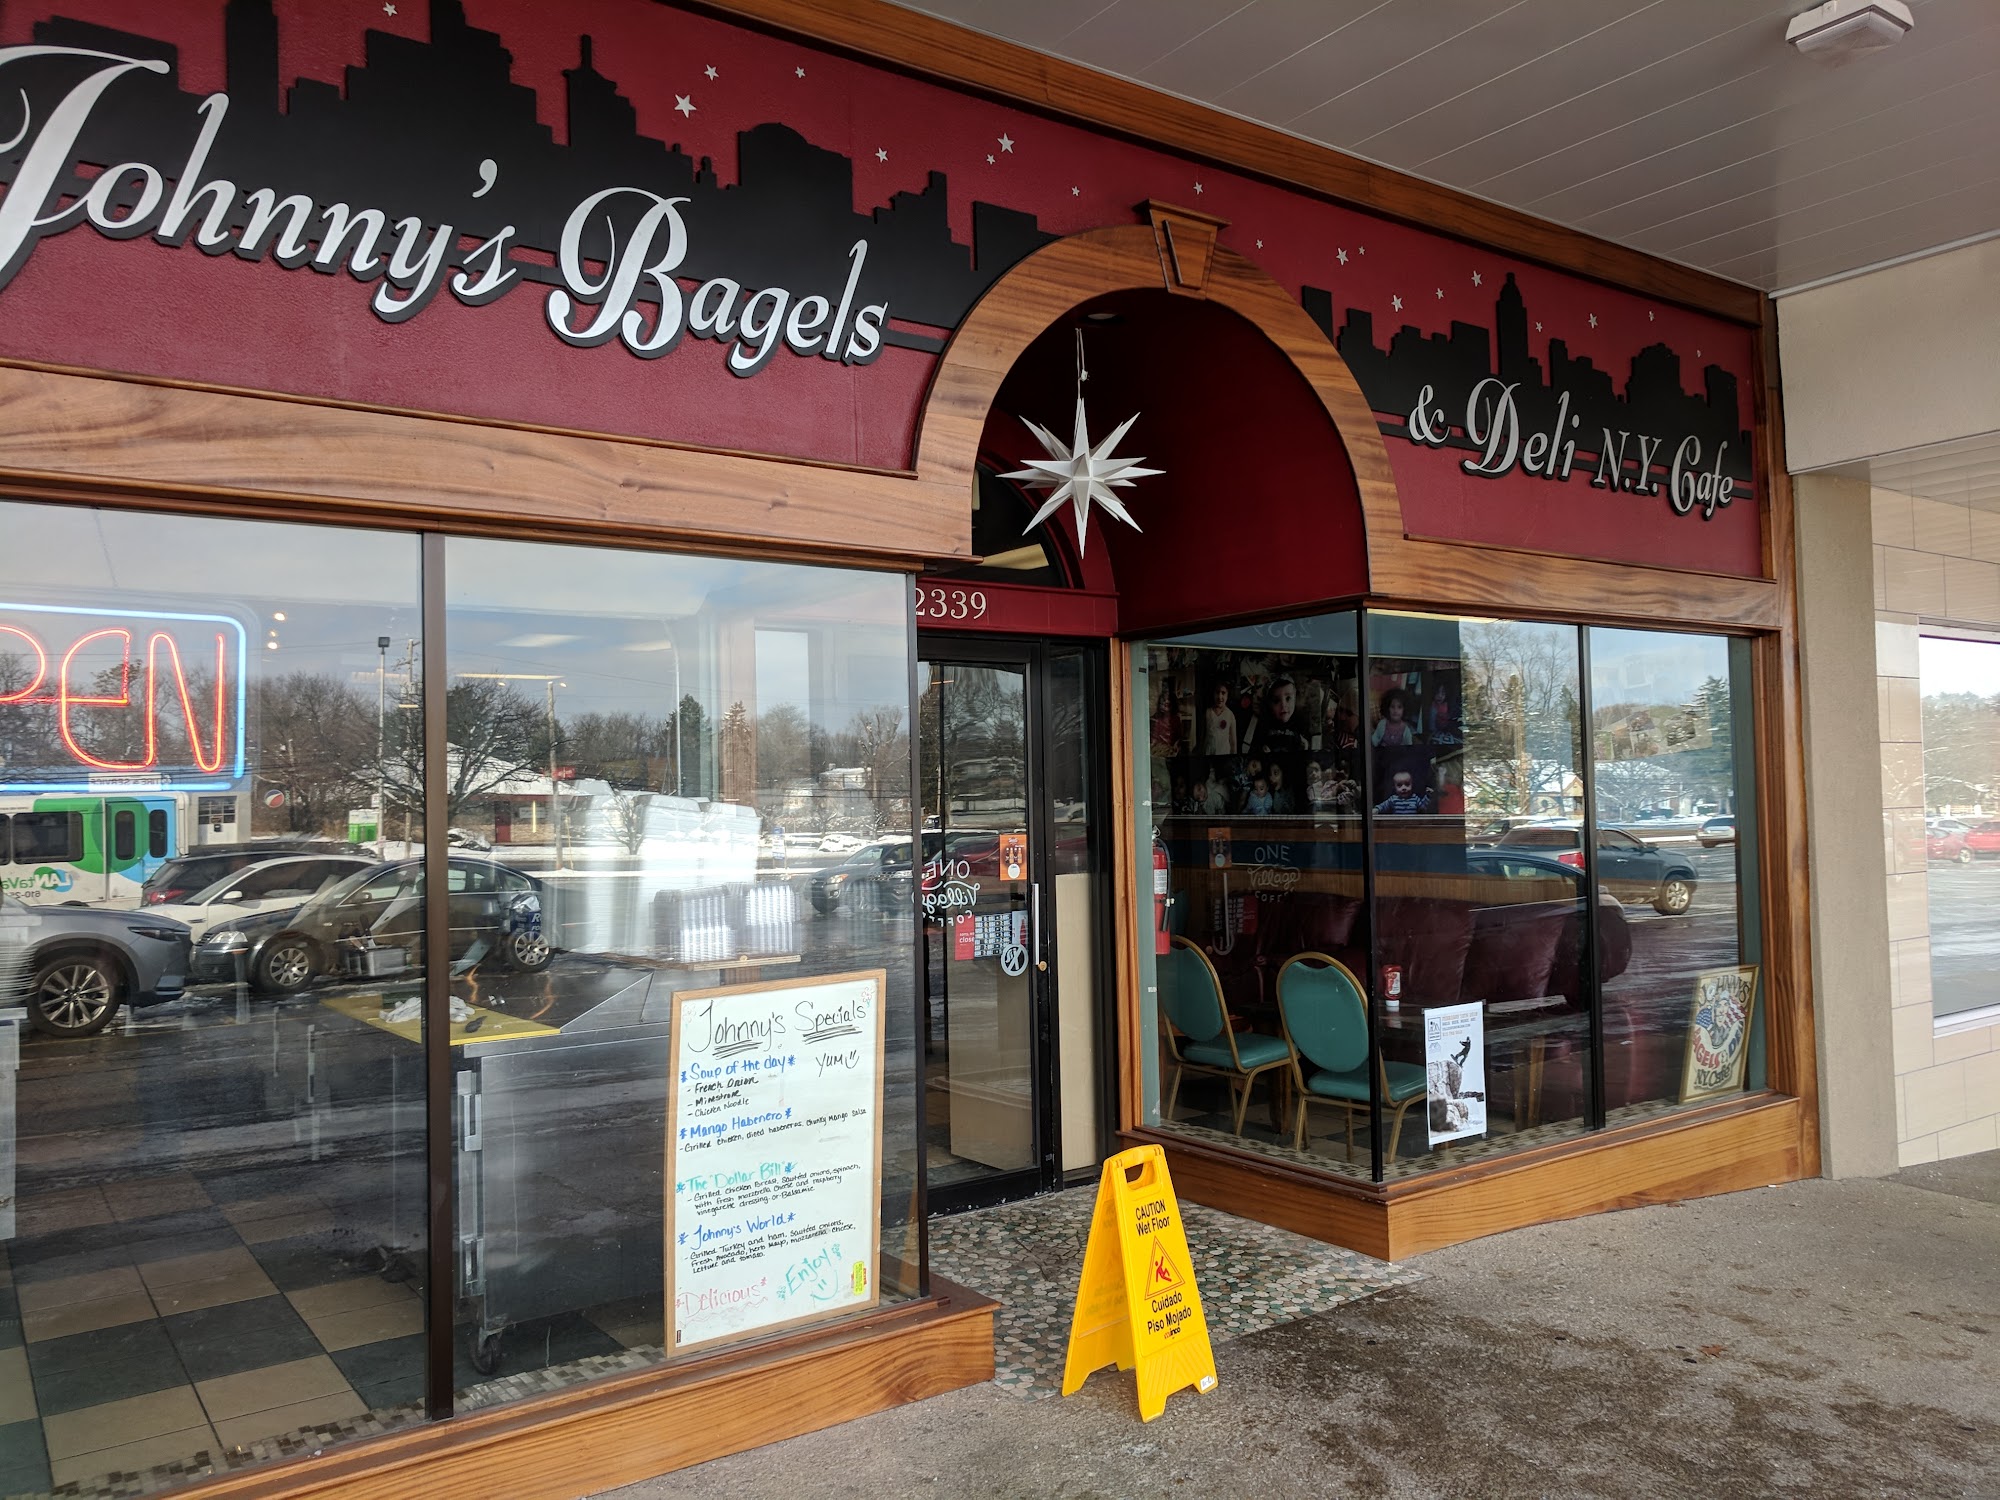 Johnny's Bagels and Deli